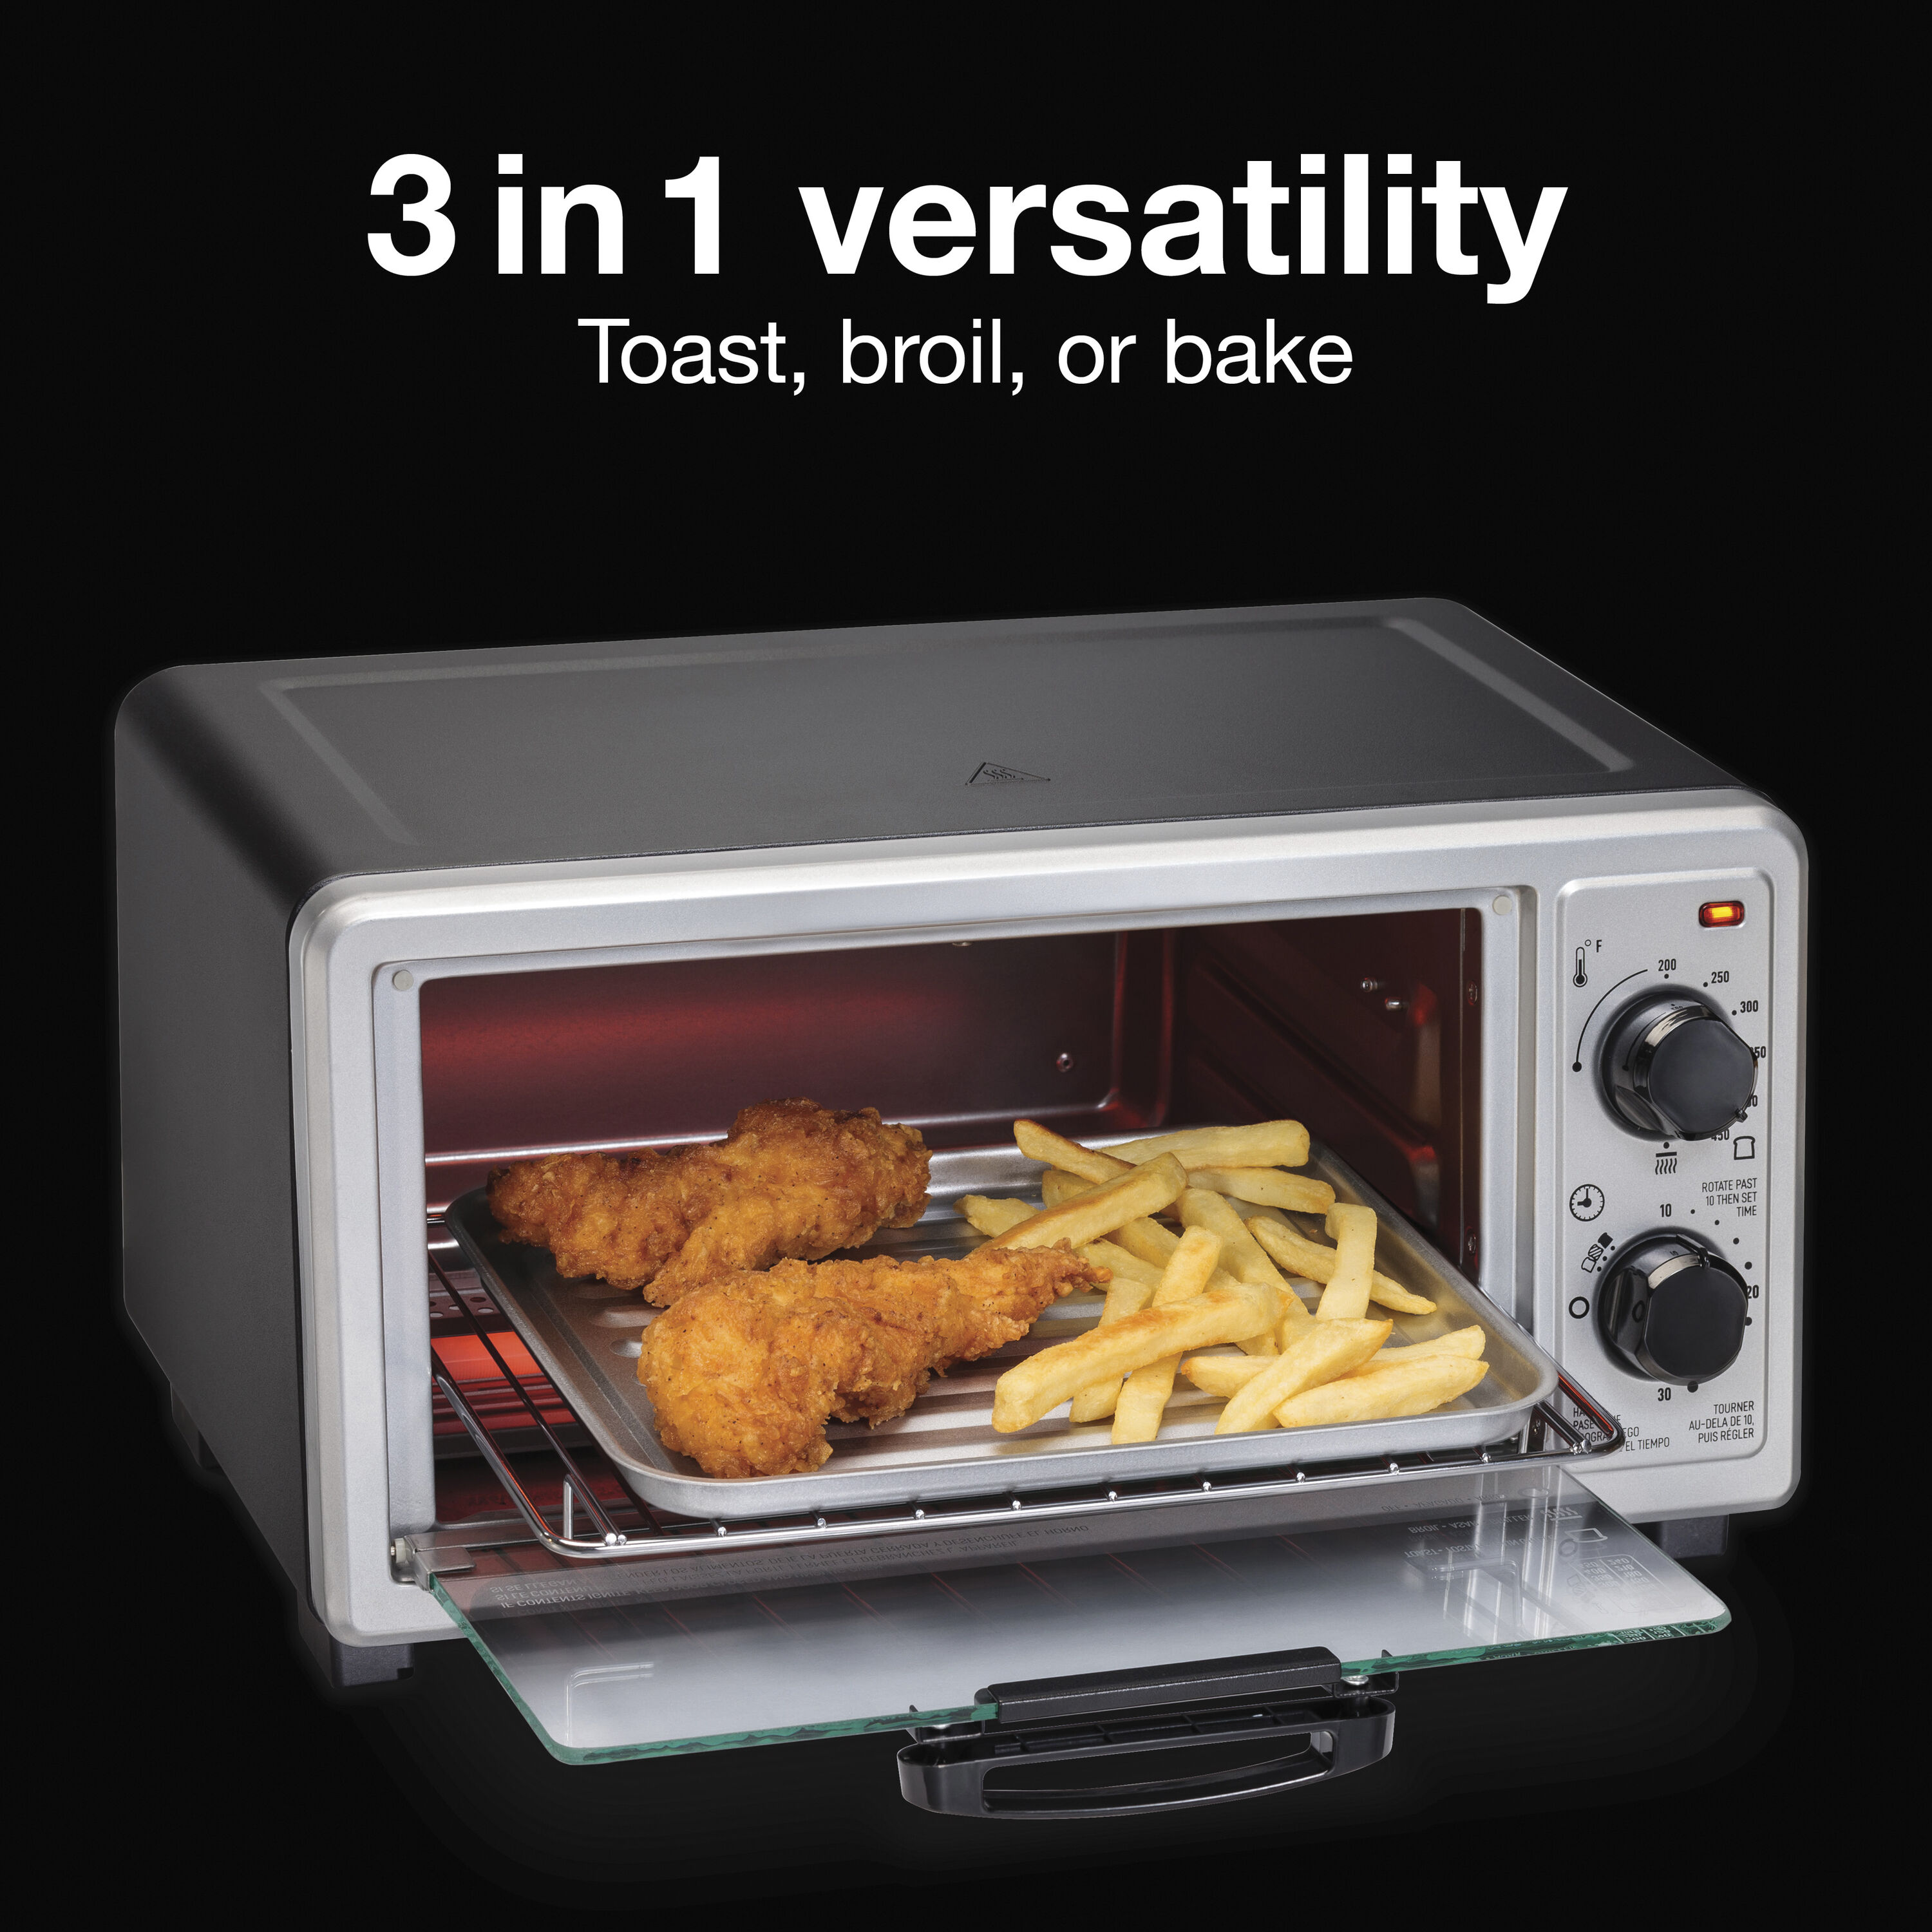 Total Chef 4-Slice Natural Convection Toaster Oven, Fits A 9 inch Pizza, Compact Countertop Oven, 30 Minute Timer, 200-450F (93-232C) Temperature